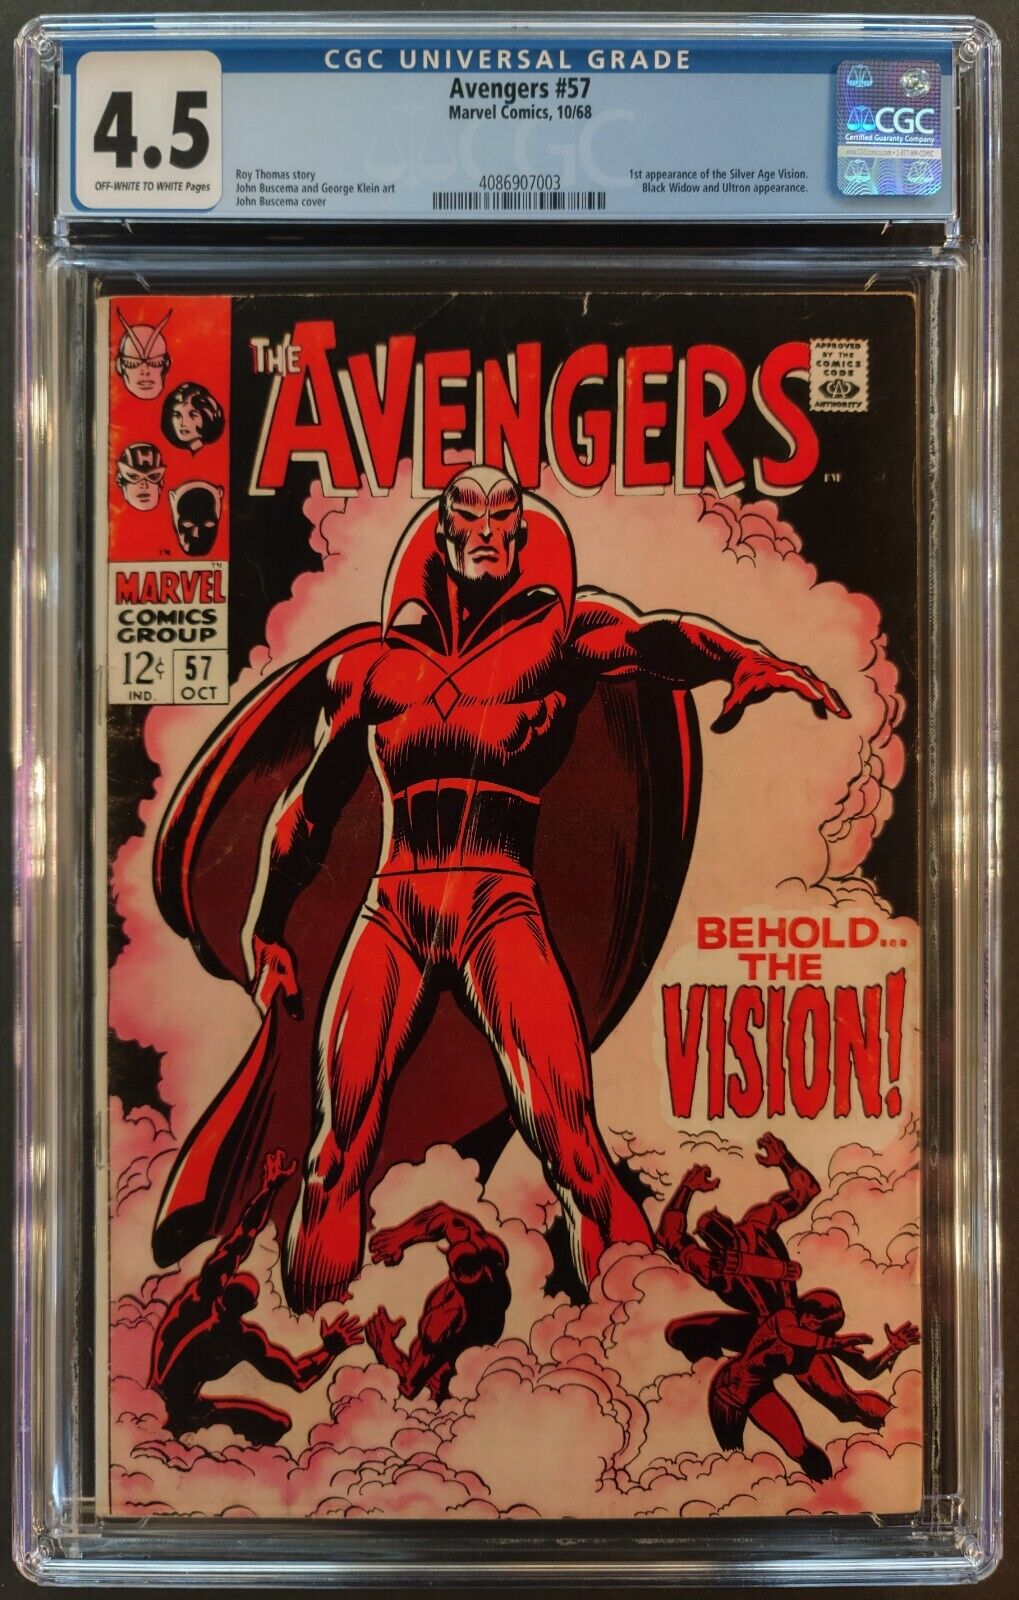 AVENGERS #57 CGC 4.5 OW-W PAGES MARVEL COMICS 1968 1ST VISION ULTRON BLACK WIDOW